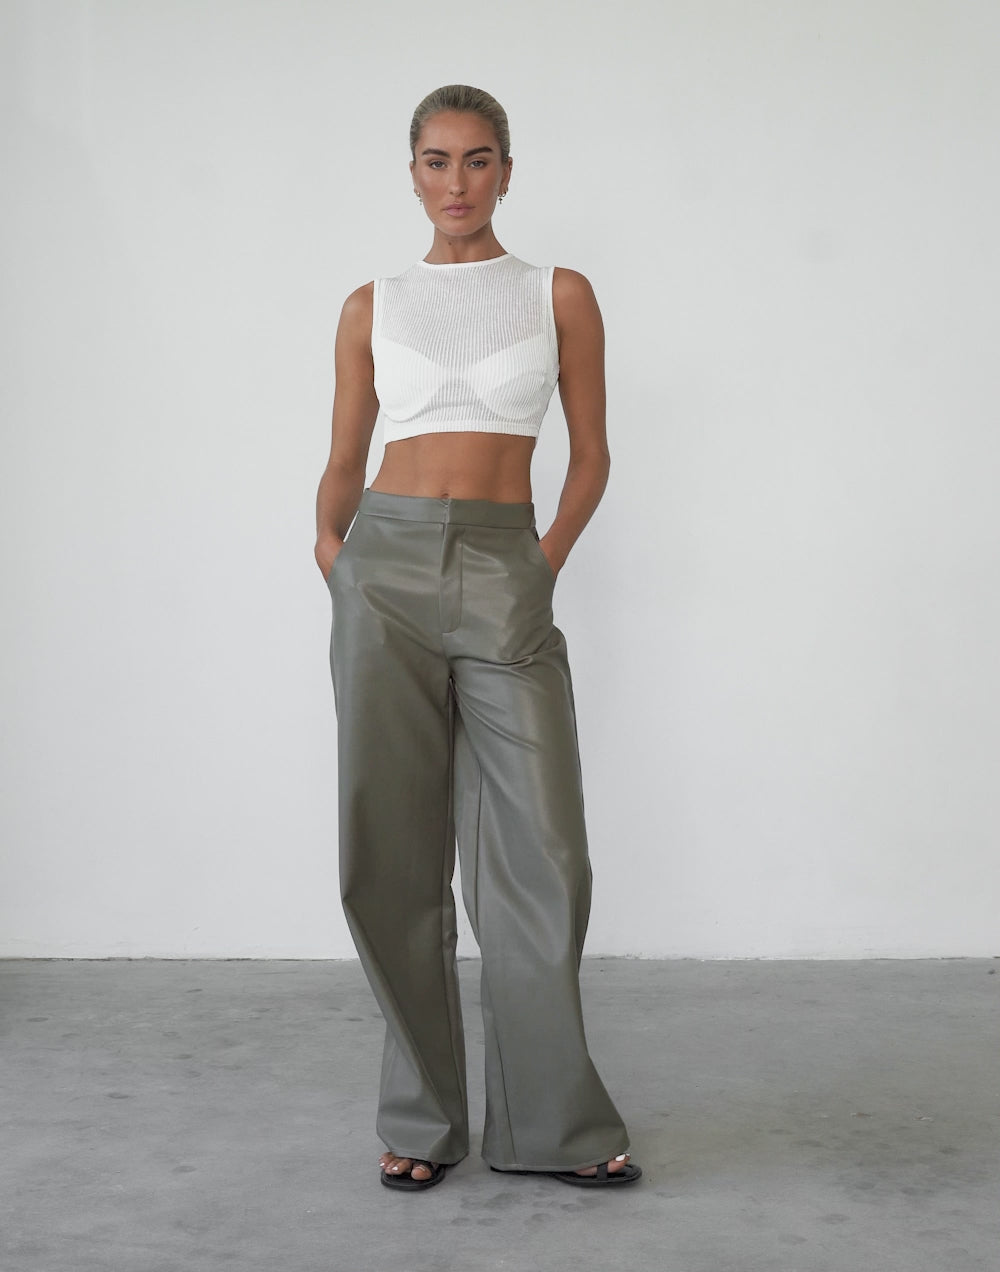 Kinetic Crop Top (White)